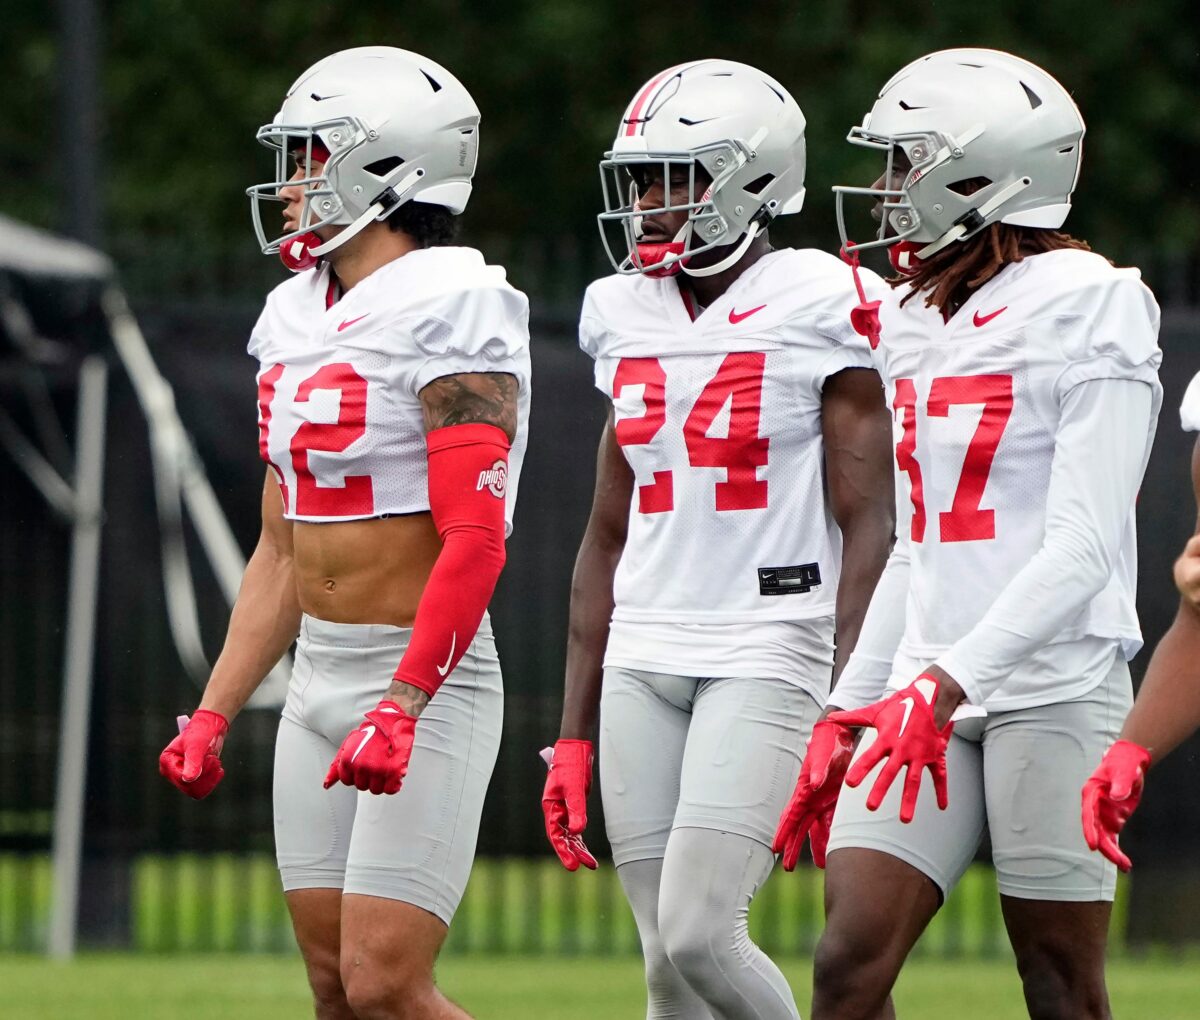 Another Ohio State defensive back enters the transfer portal